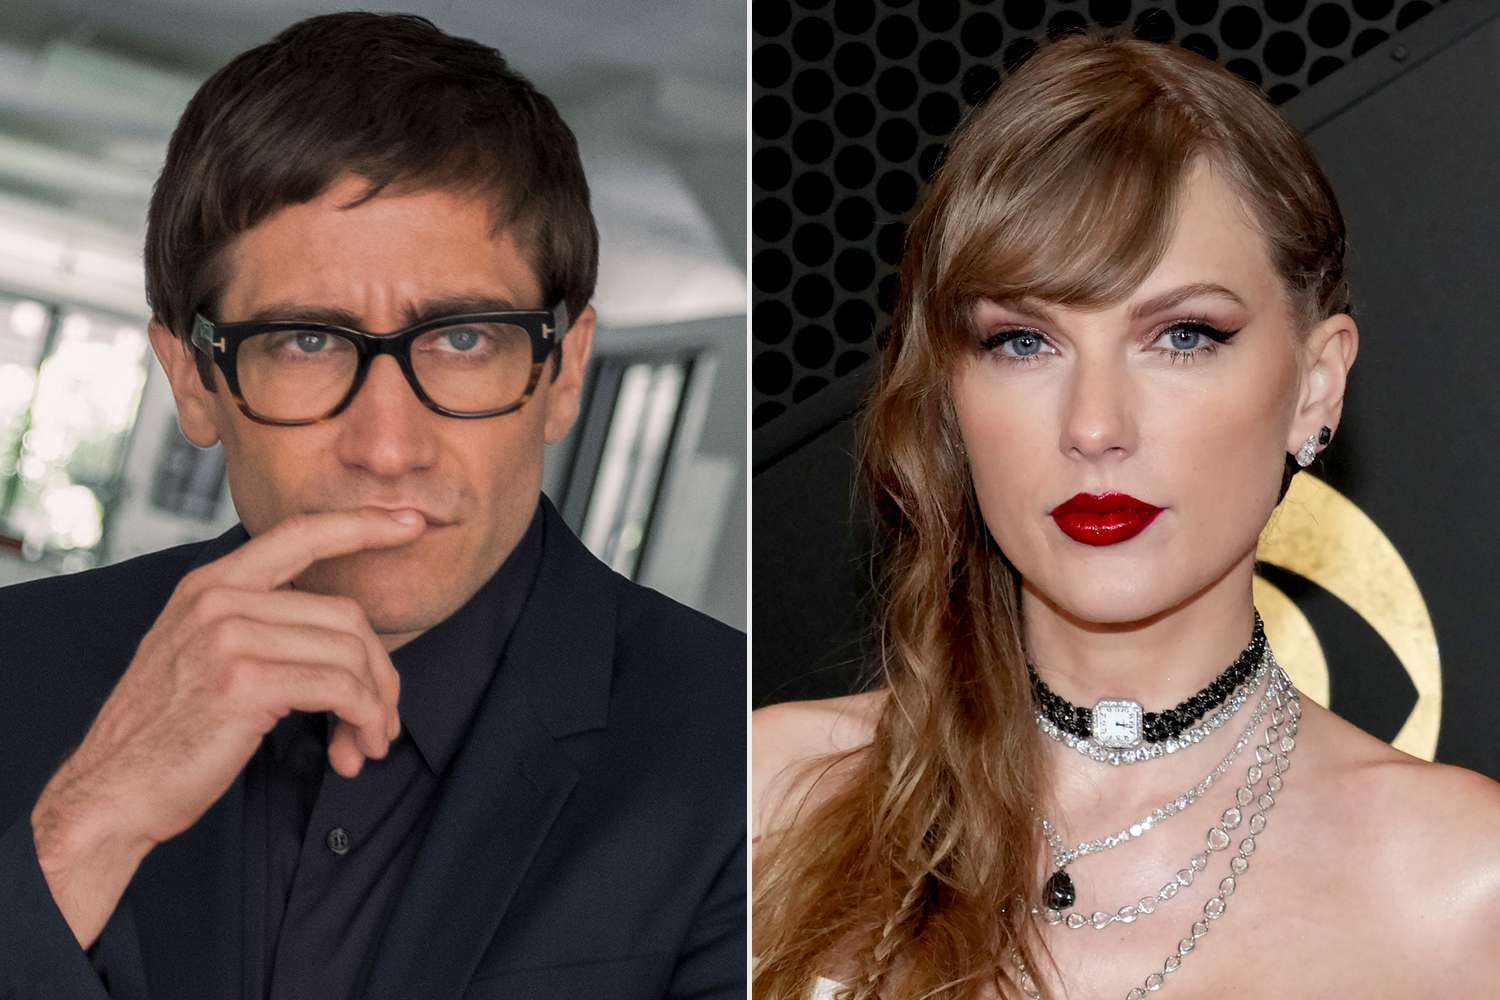 Jake Gyllenhaal’s legal blindness fuels Taylor Swift fan speculation, all too well